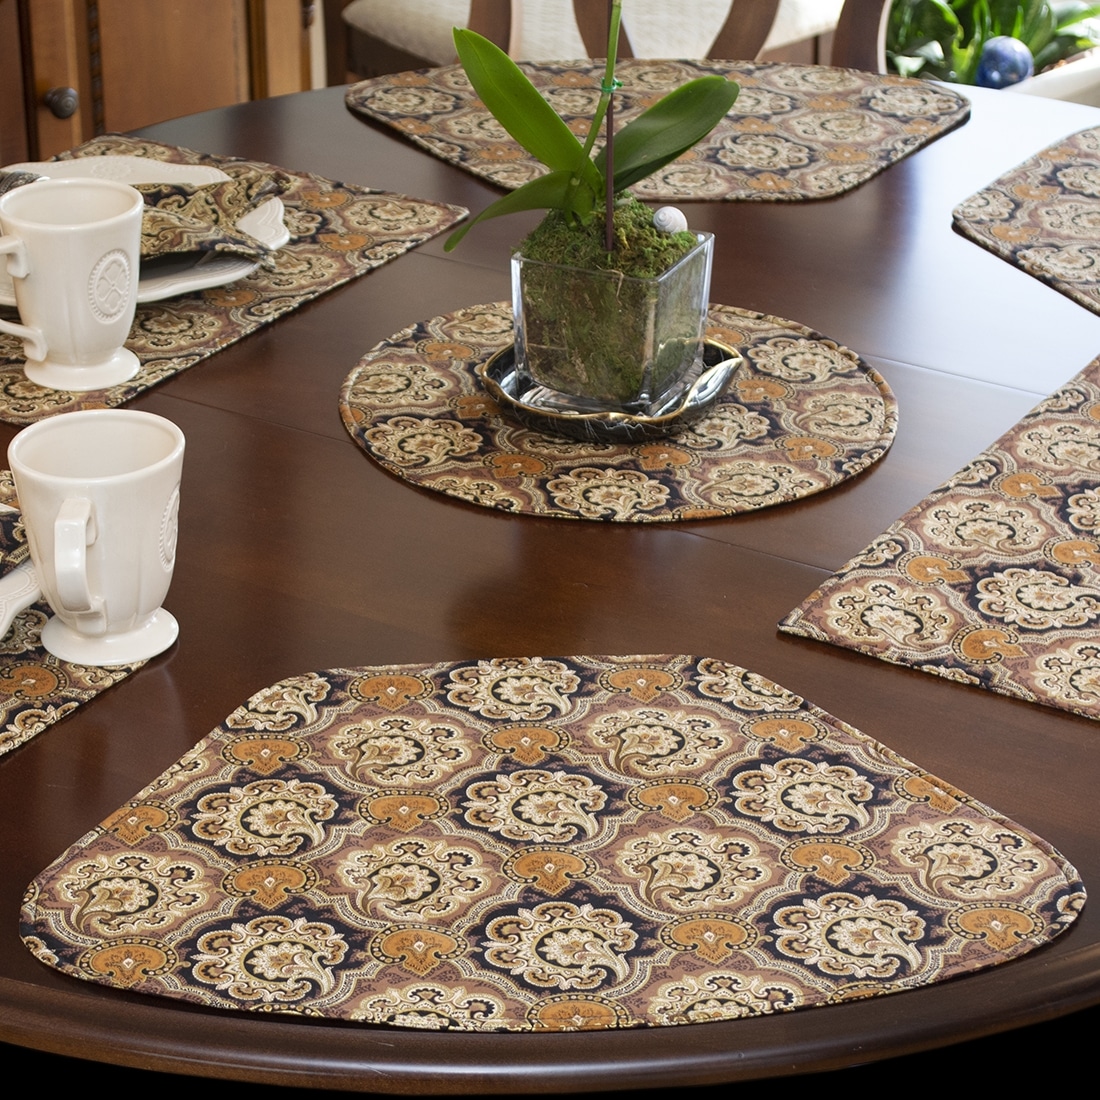 Wedge Shaped Placemats By Sweet Pea Linens, Wedge Placemats For Round Table Pattern